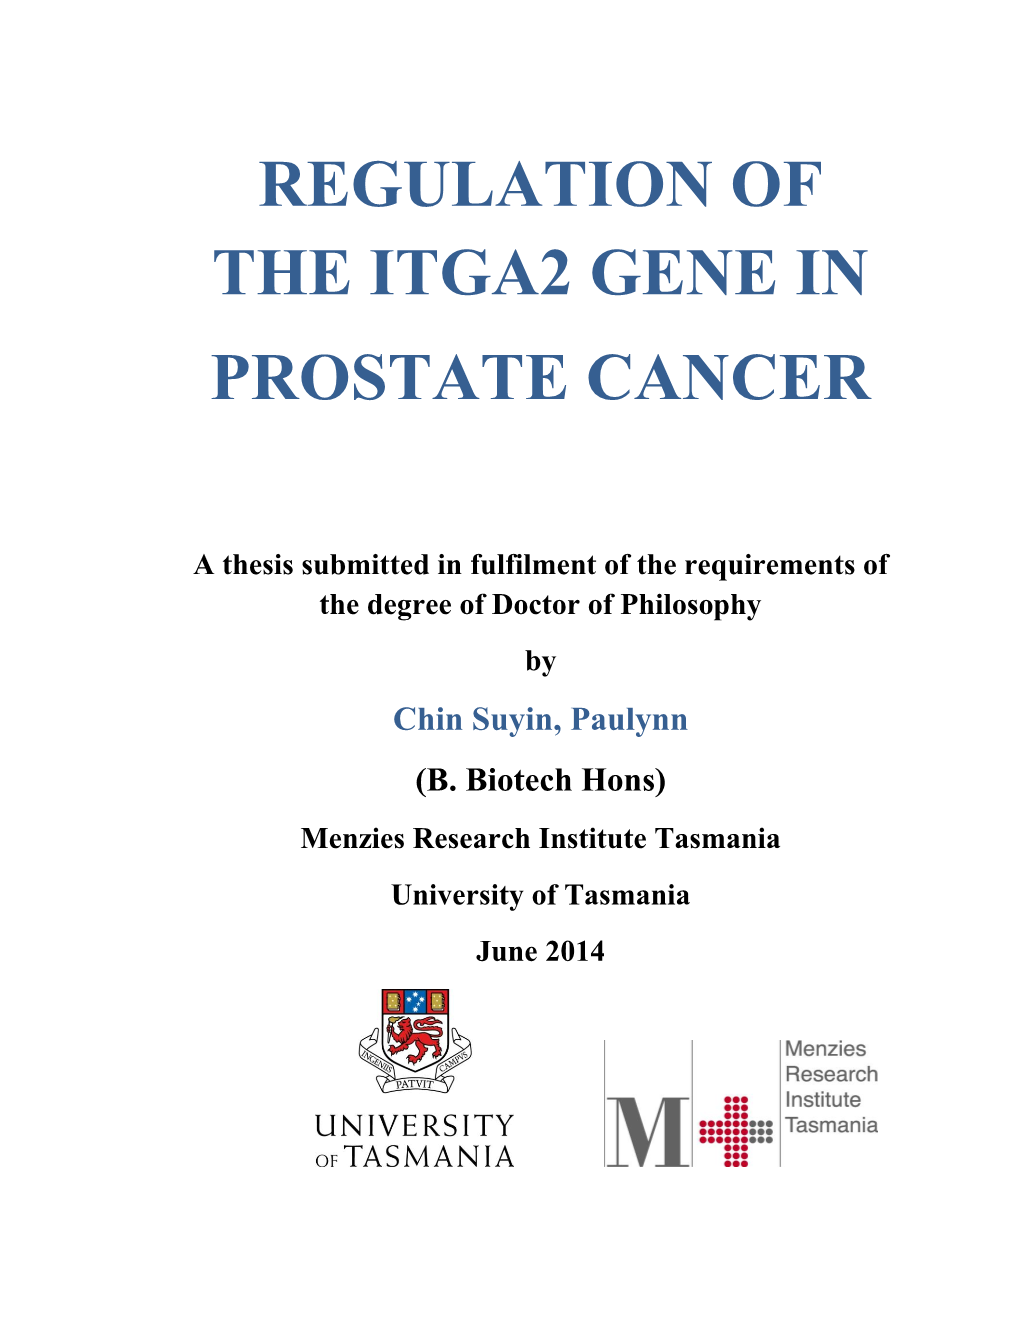 Regulation of the Itga2 Gene in Prostate Cancer